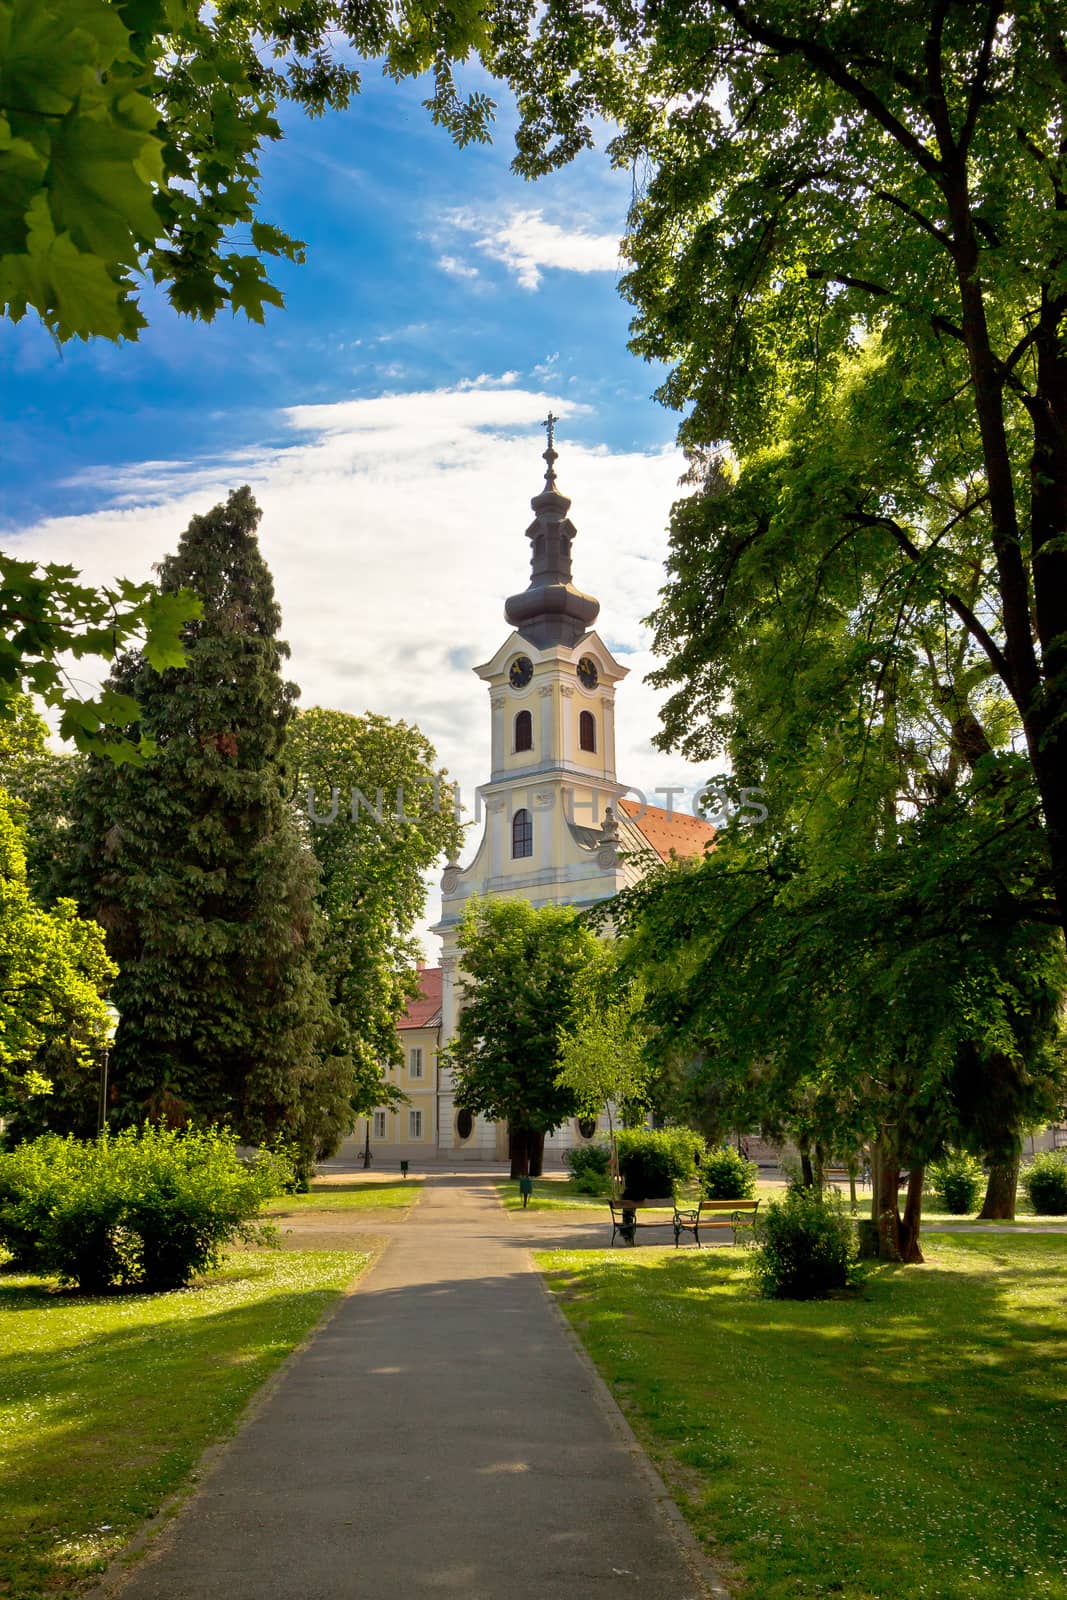 Town of Bjelovar park and church by xbrchx